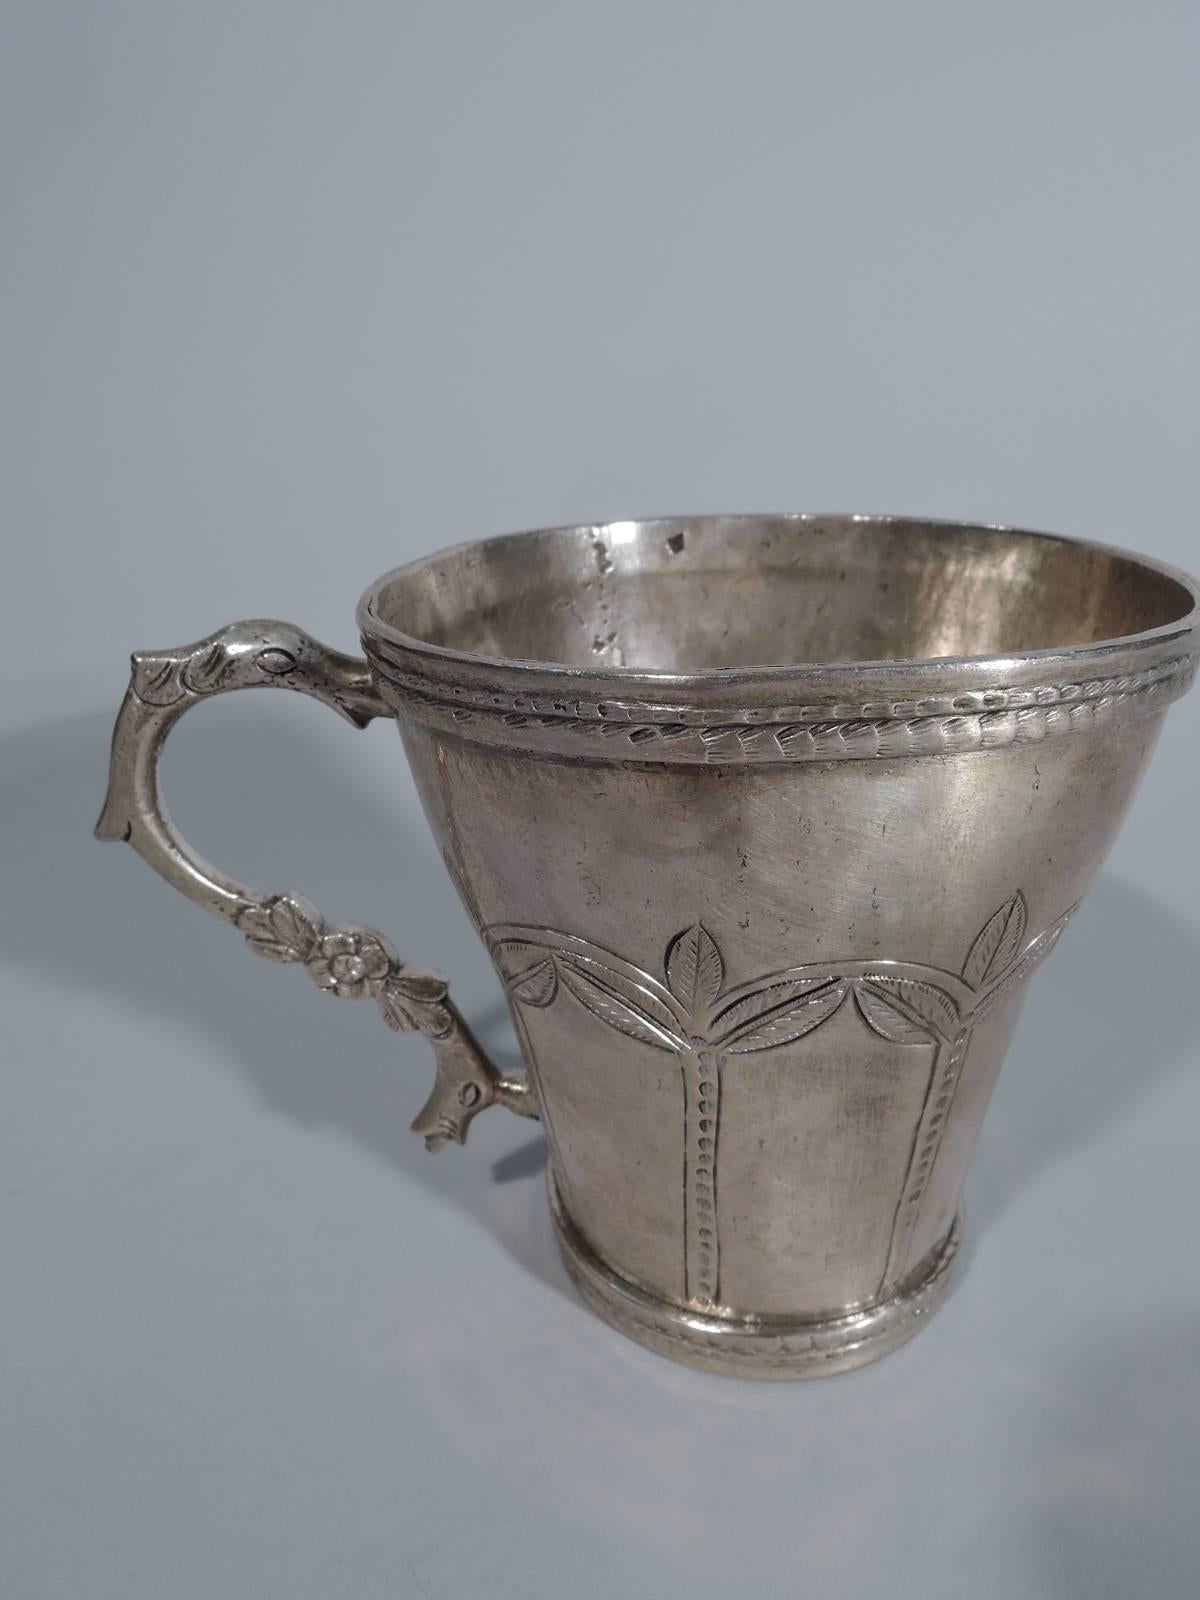 South American silver mug with snake handle, circa 1850. Handmade. Tapering sides with engraved palm tree arcade. Applied and notched rim and base. Engraved snake-form handle with flowers. Weight: 7 troy ounces.  